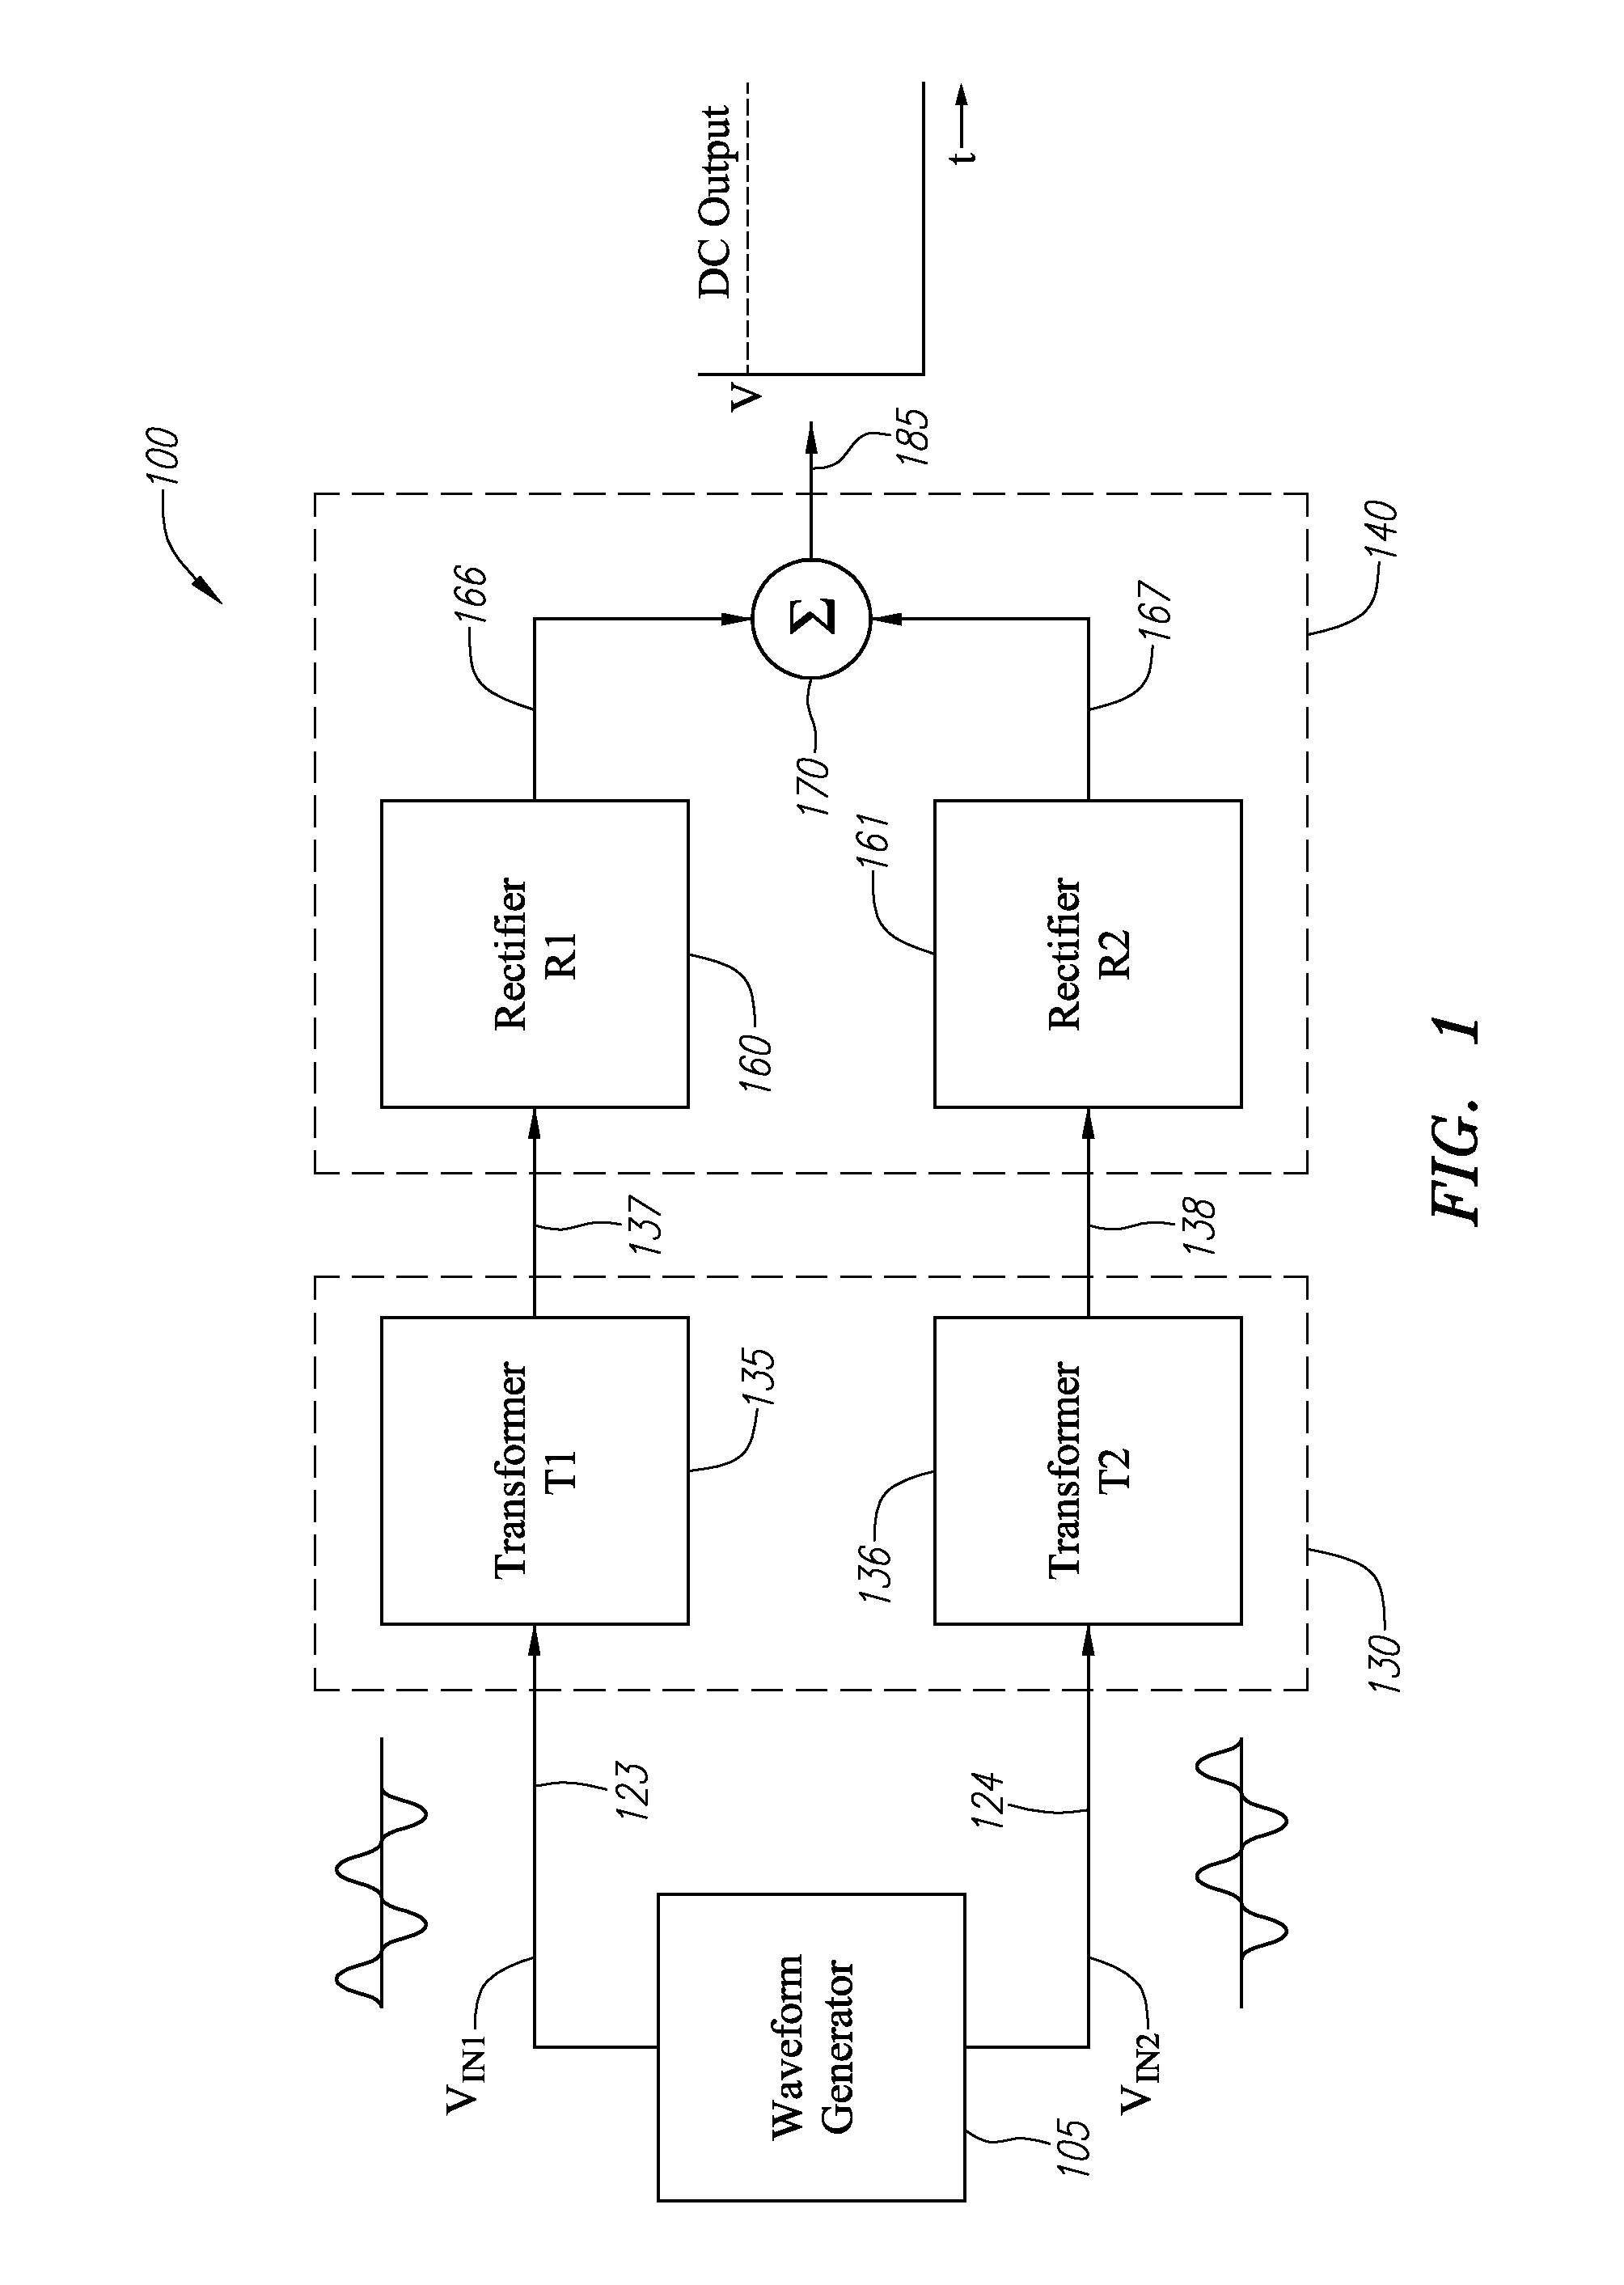 Power converter with low ripple output